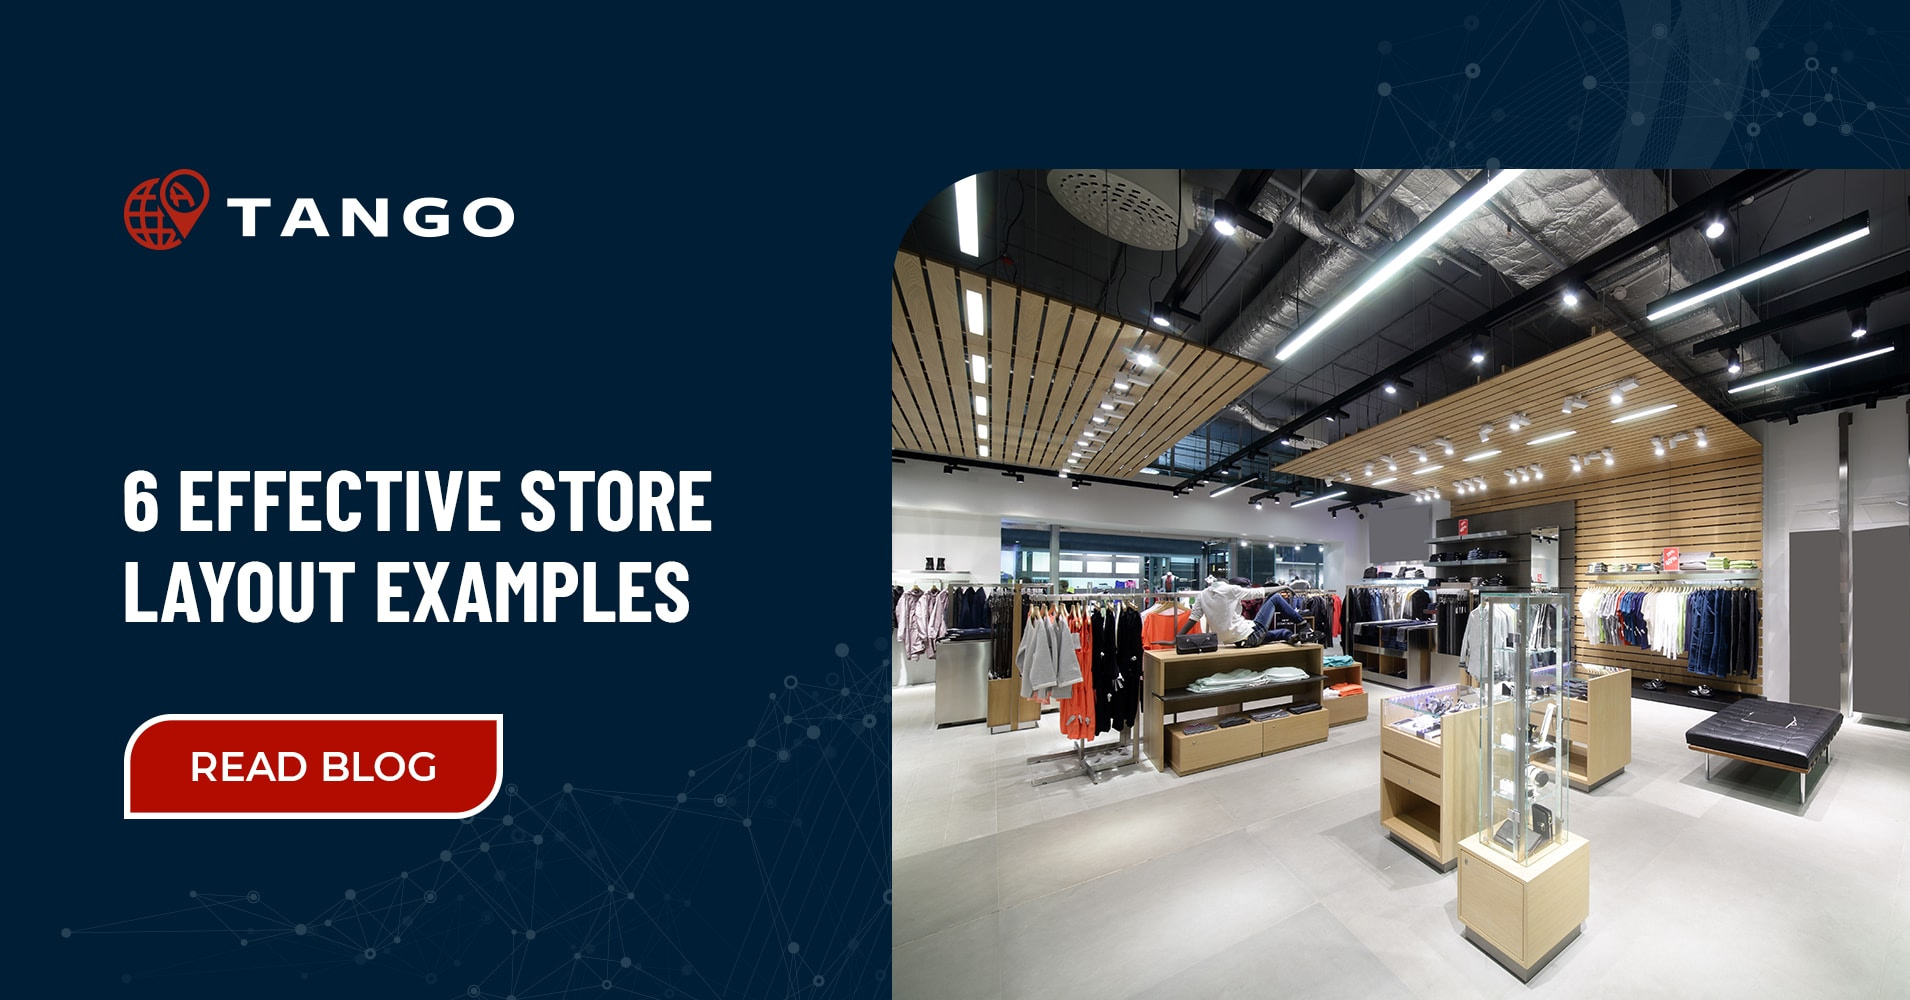 9 Clothing Store Layout and Design Ideas to Improve Sales - WFS